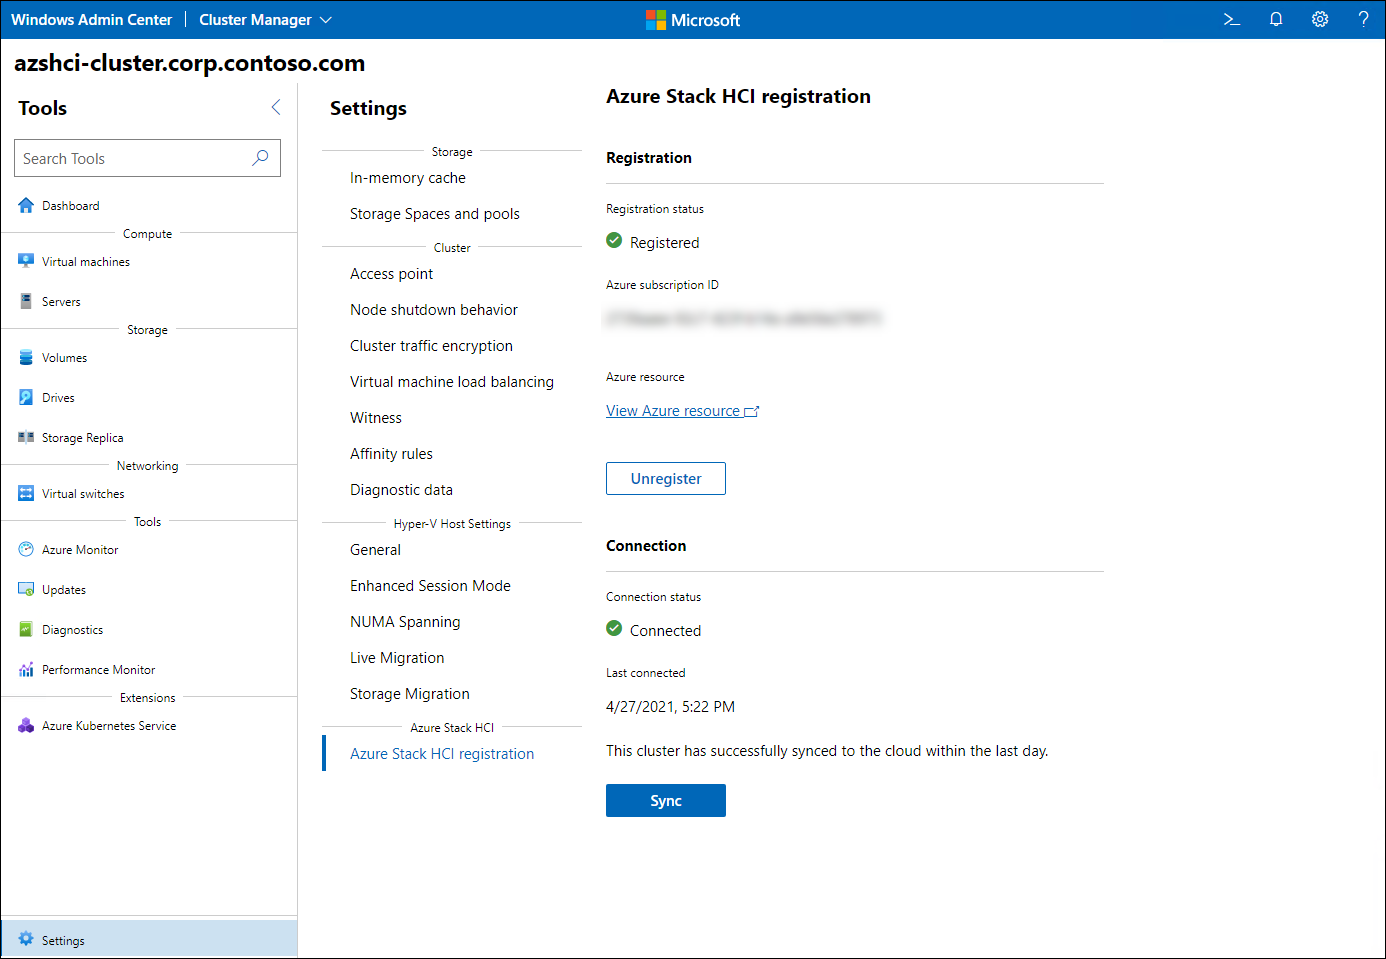 The screenshot depicts the Register Azure Stack HCI settings of an Azure Stack HCI cluster.